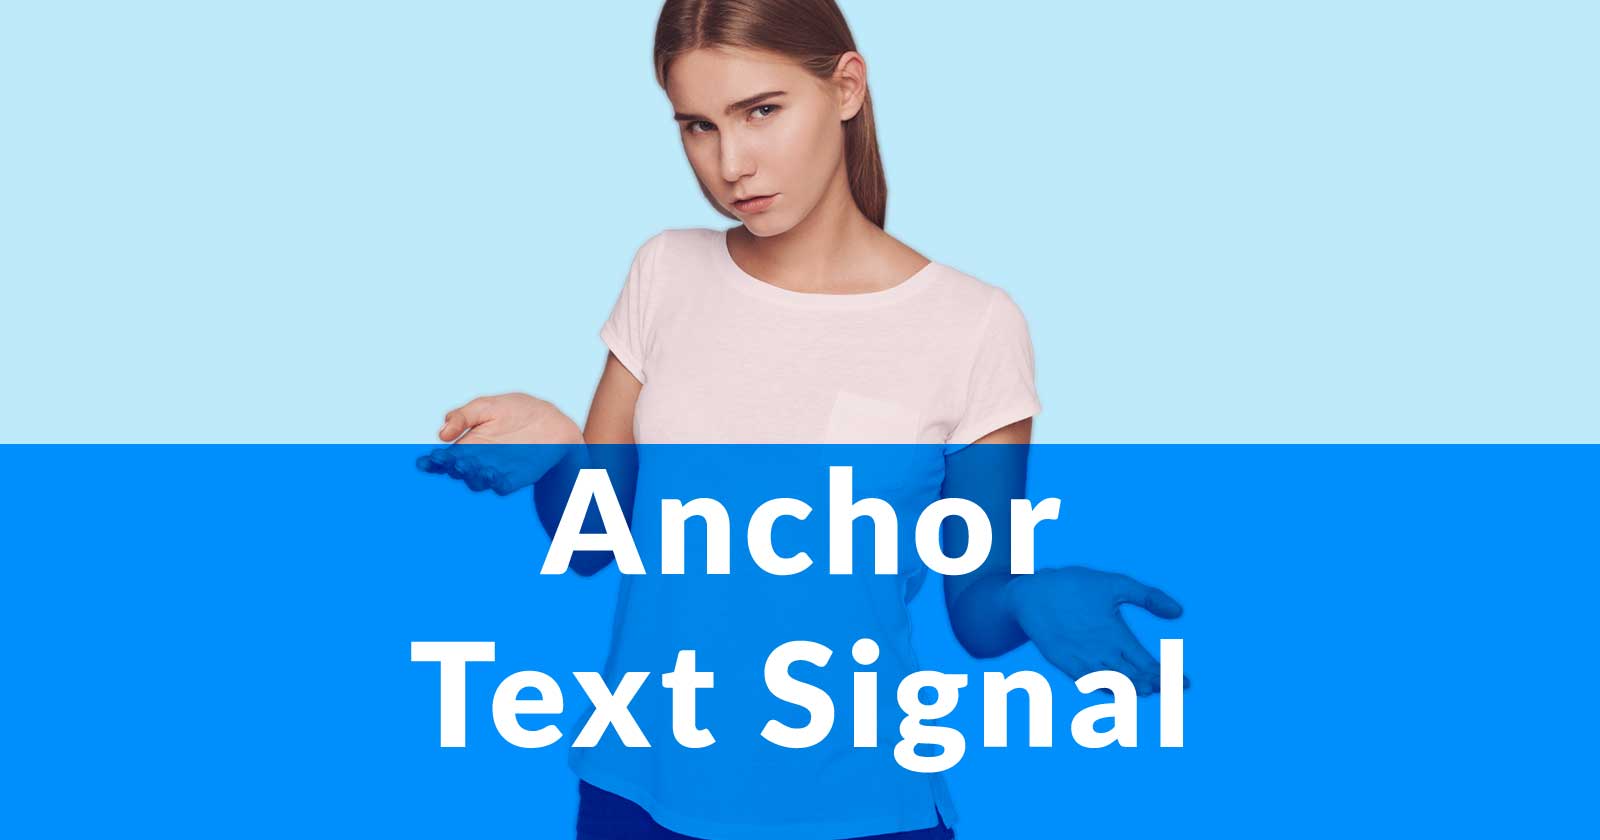 Image of a woman gesturing in a what the heck manner, with the words Anchor Text Signal superimposed on the bottom half of the image